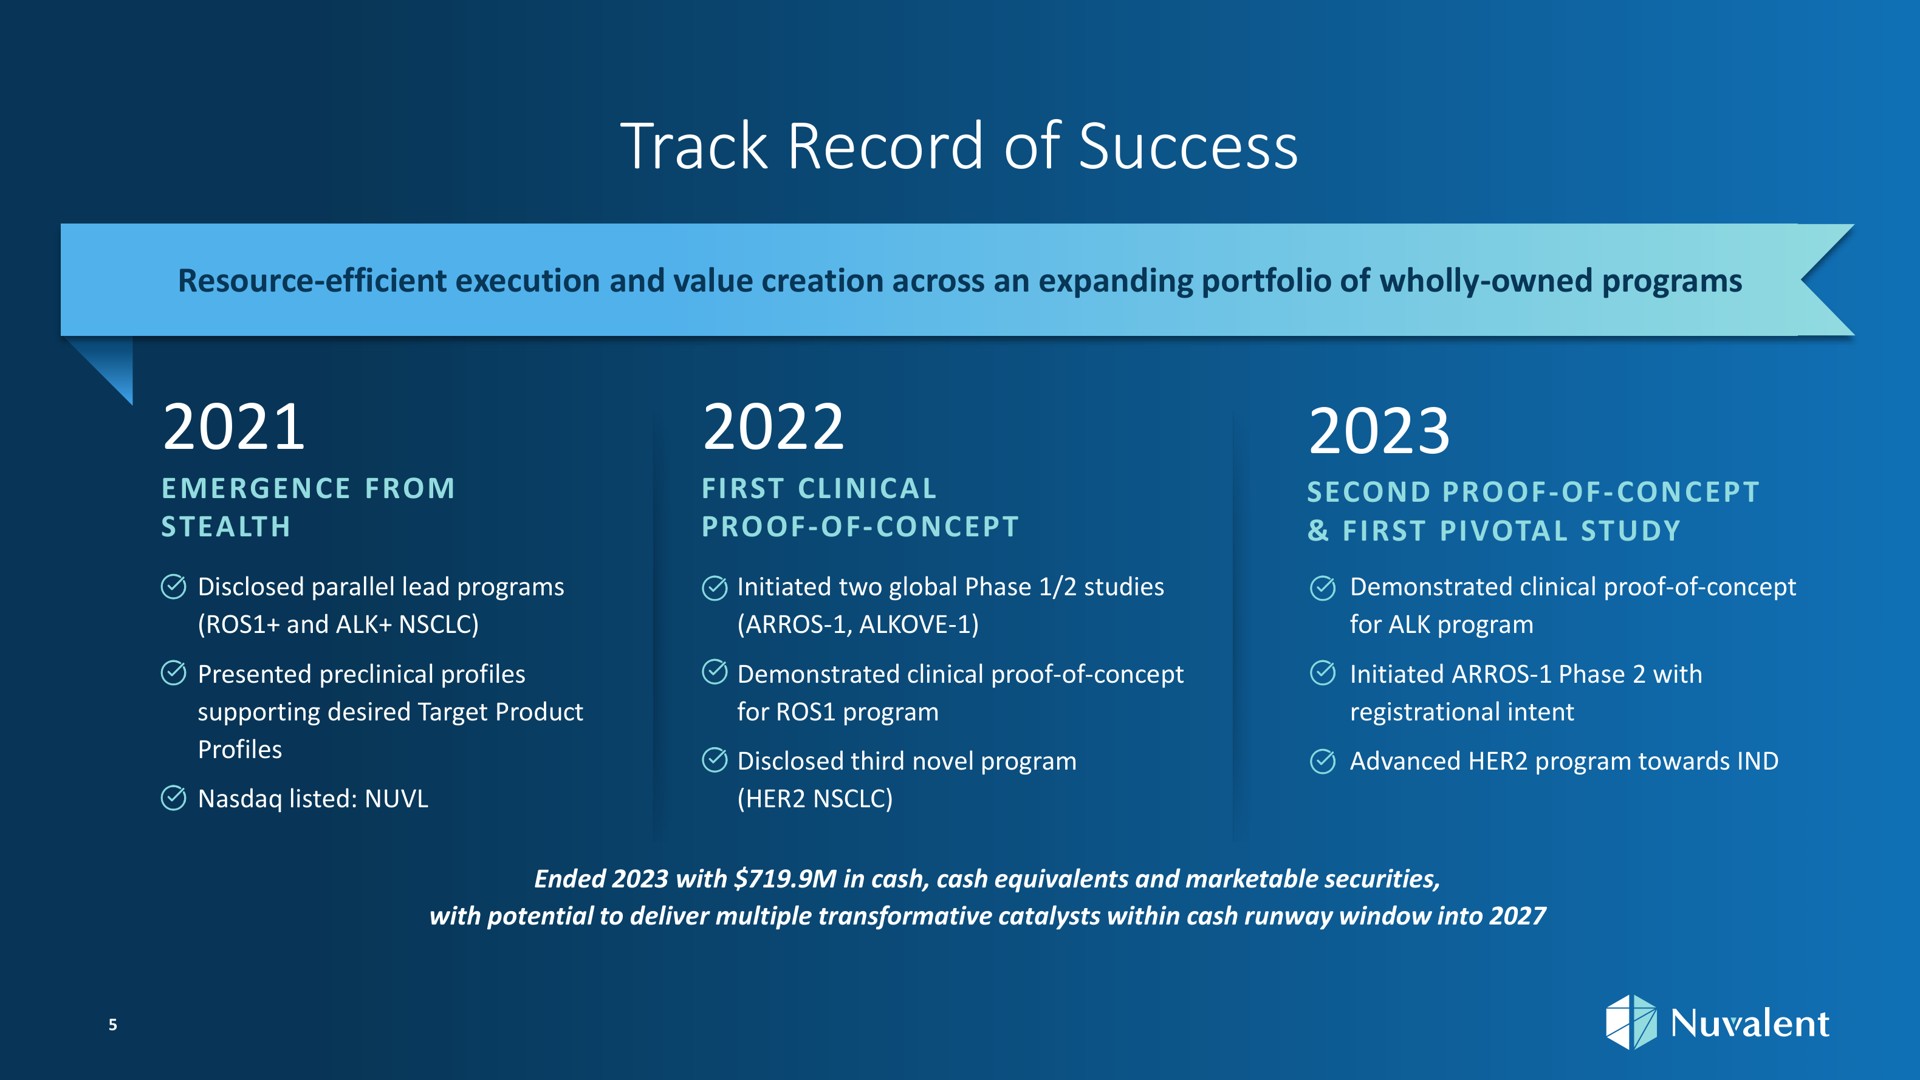 track record of success resource efficient execution and value creation across an expanding portfolio wholly owned programs loyal emergence from stealth first clinical proof of concept second proof of concept first pivotal study disclosed parallel lead programs initiated two global phase studies demonstrated clinical proof of concept and alk for alk program presented preclinical profiles demonstrated clinical proof of concept initiated phase with supporting desired target product for program registrational intent as disclosed third novel program advanced her program towards listed her paper kim kim mila a with potential to deliver multiple transformative catalysts within cash runway window into i a | Nuvalent